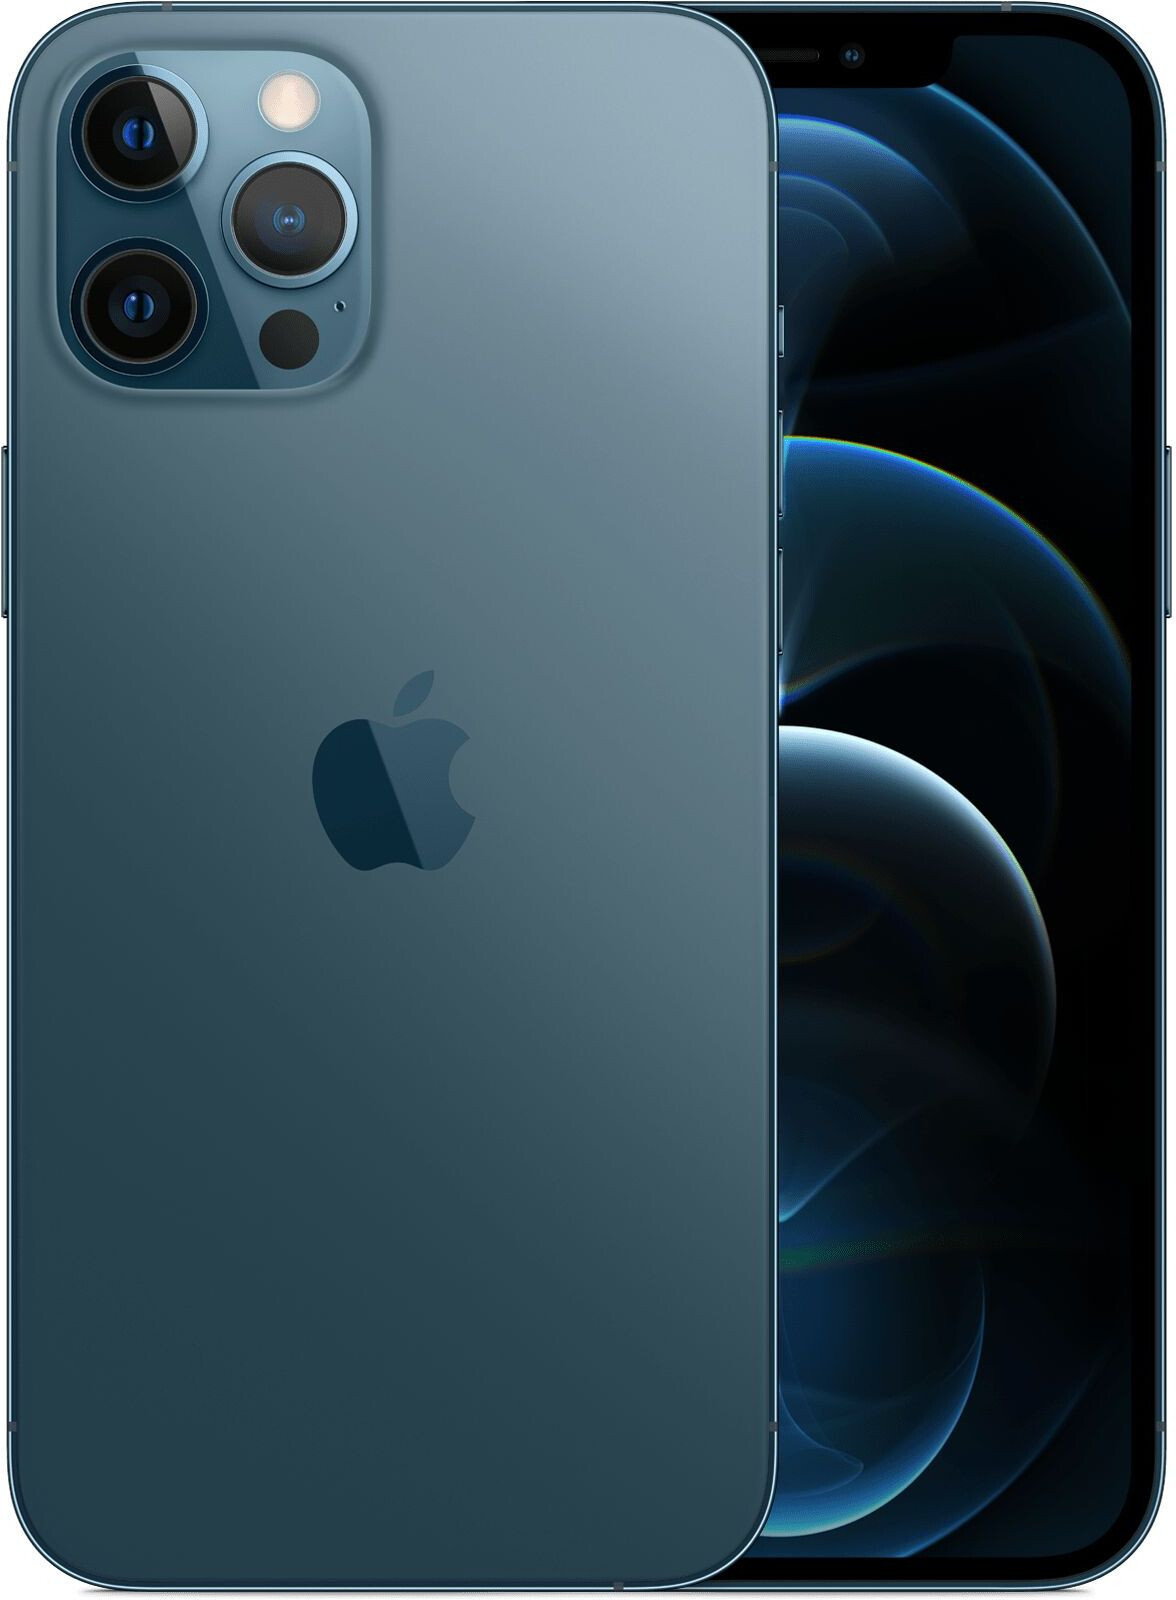 iPhone 12 Pro 512gb, Pacific Blue (MGMX3/MGM43) 